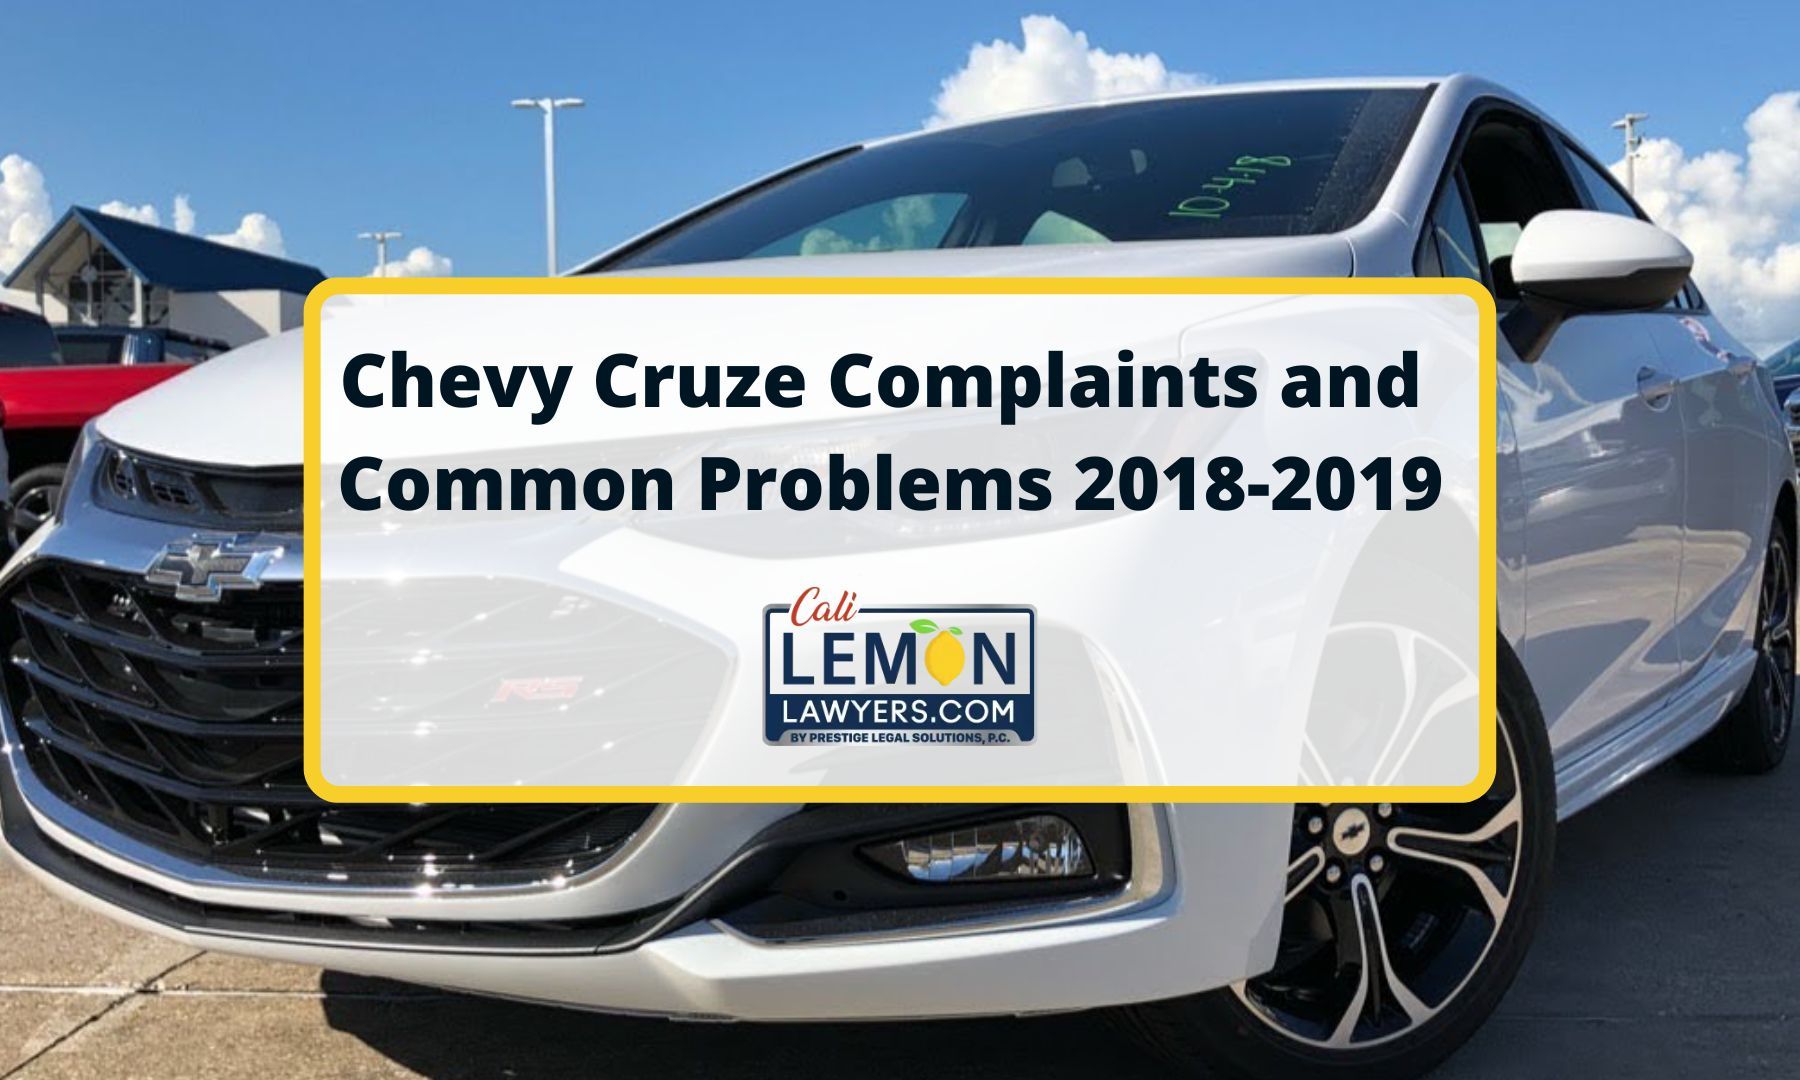 Top Chevy Cruze Complaints and Common Problems 2018-2019